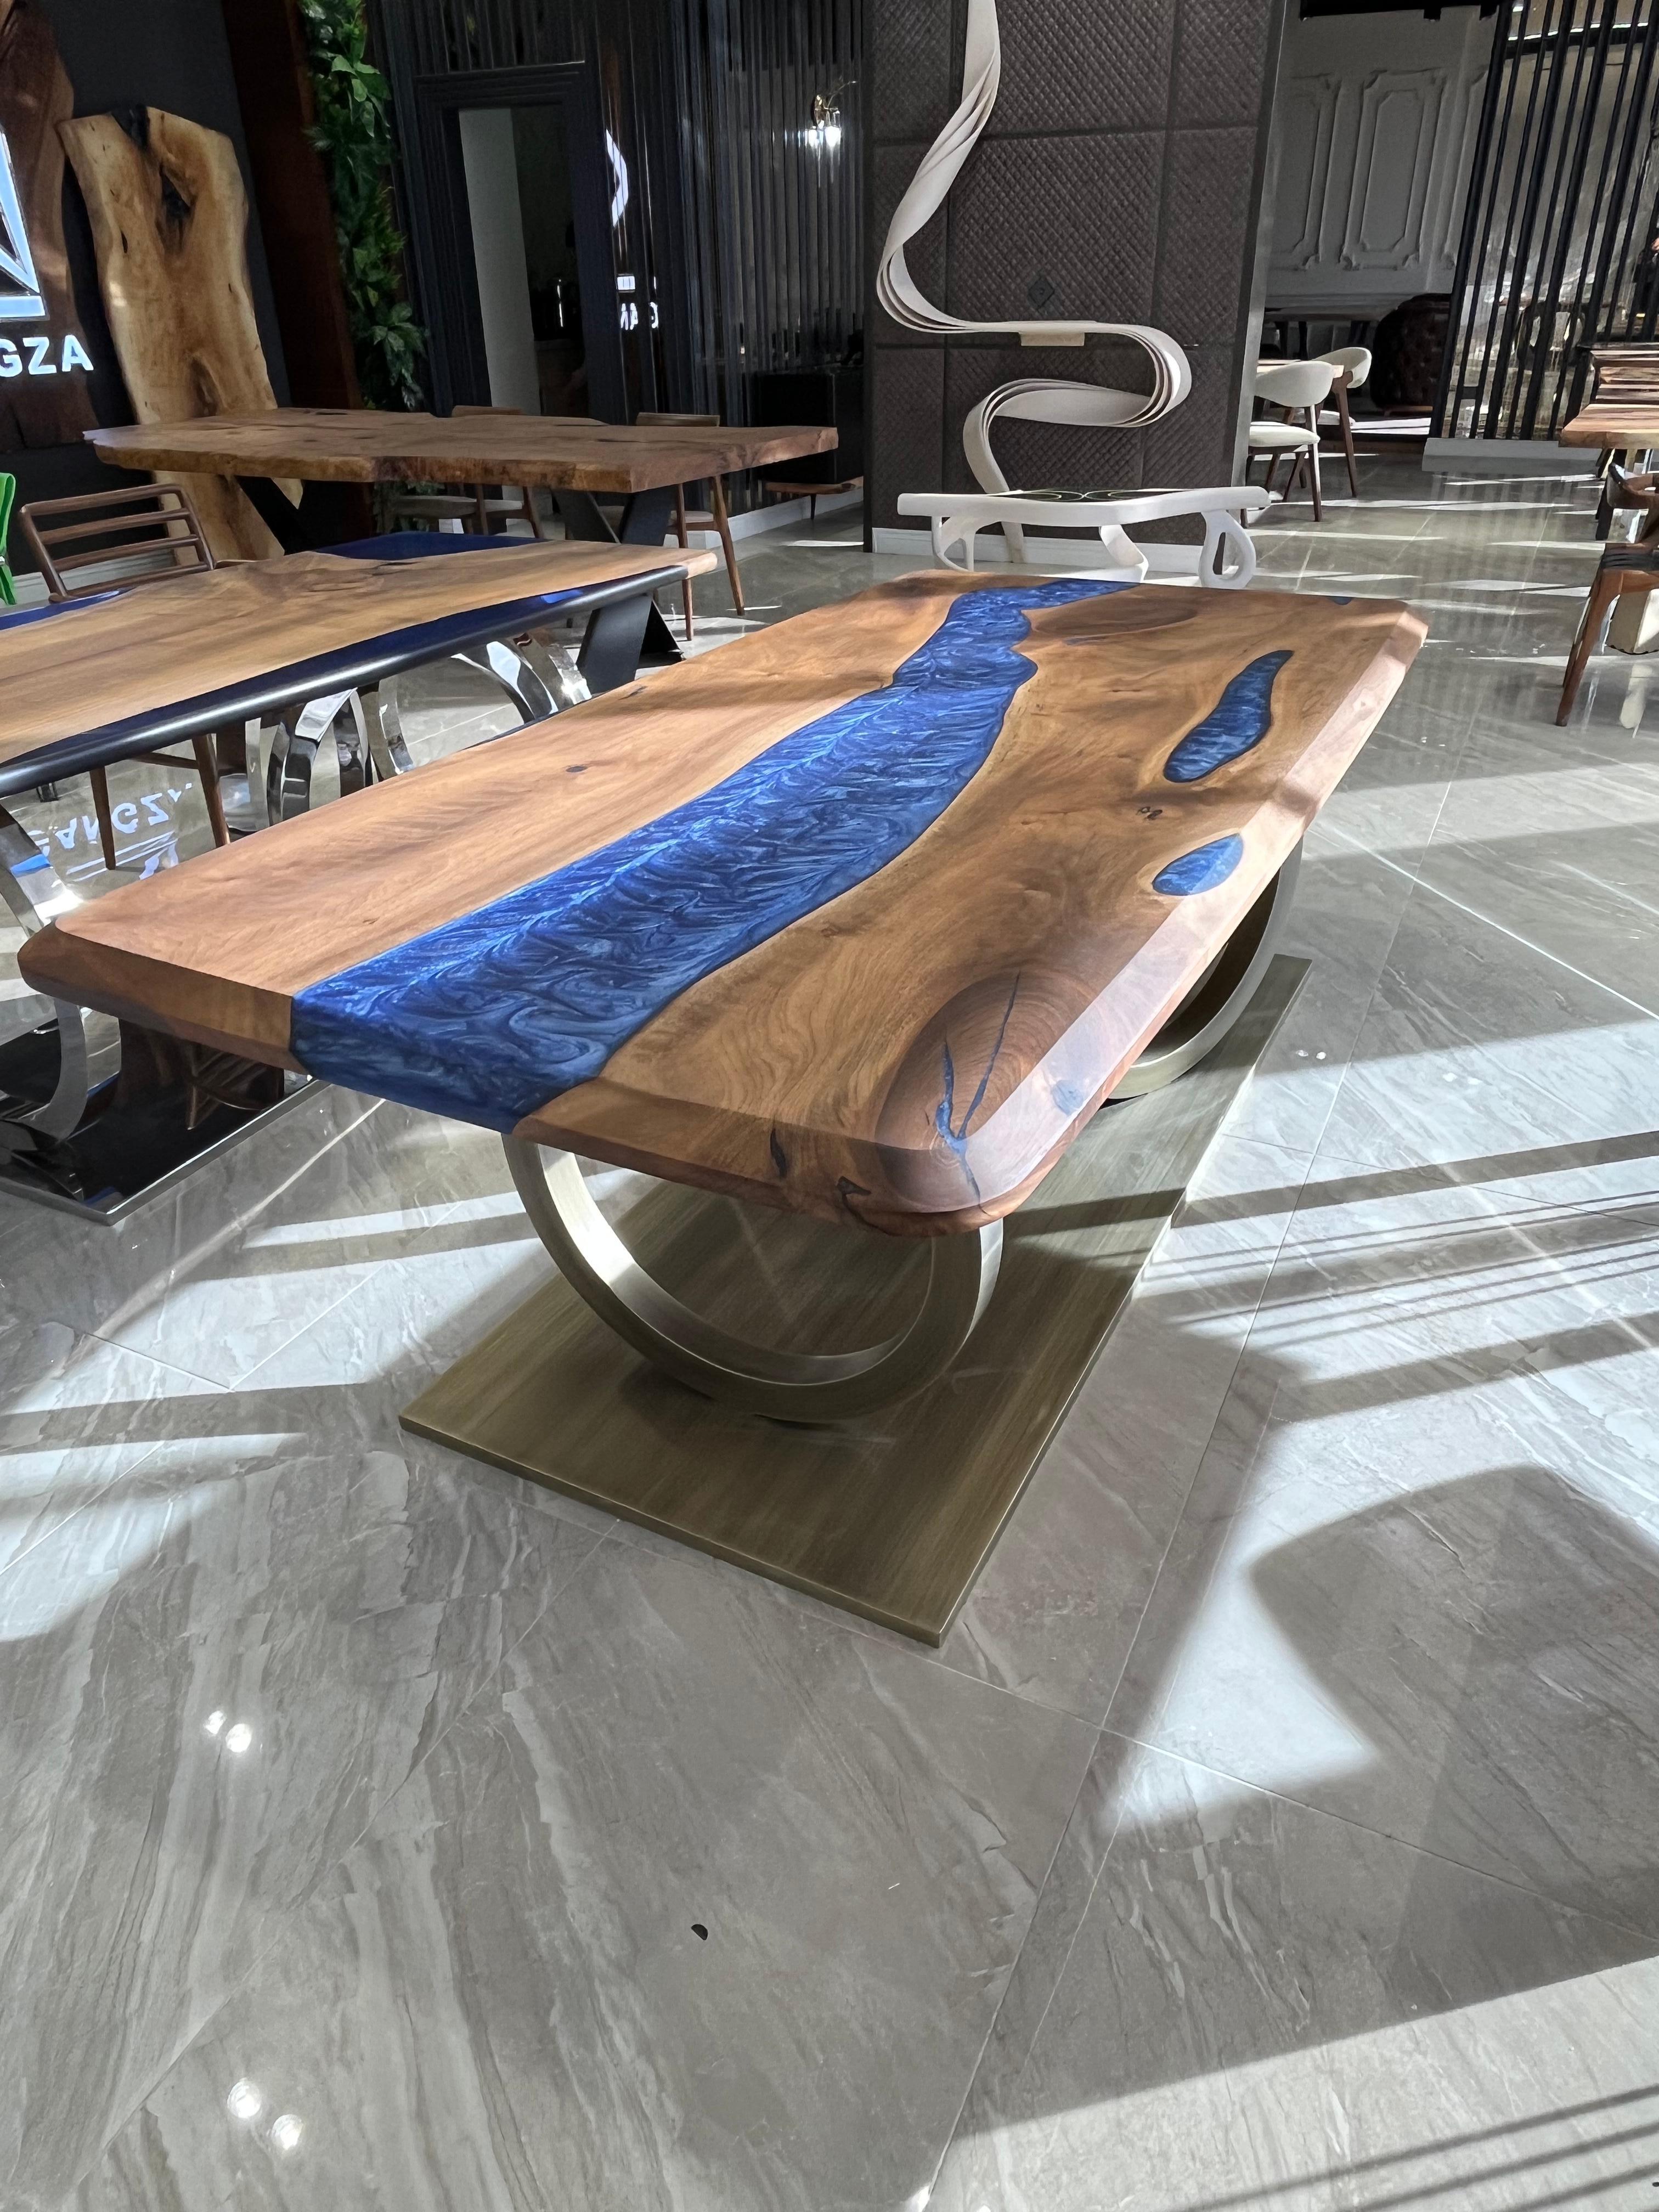 Blue Walnut Epoxy Resin Table

This table is made of walnut wood & blue epoxy. 

Price includes X and U-shaped metal legs.

Custom sizes, colours and finishes are available!